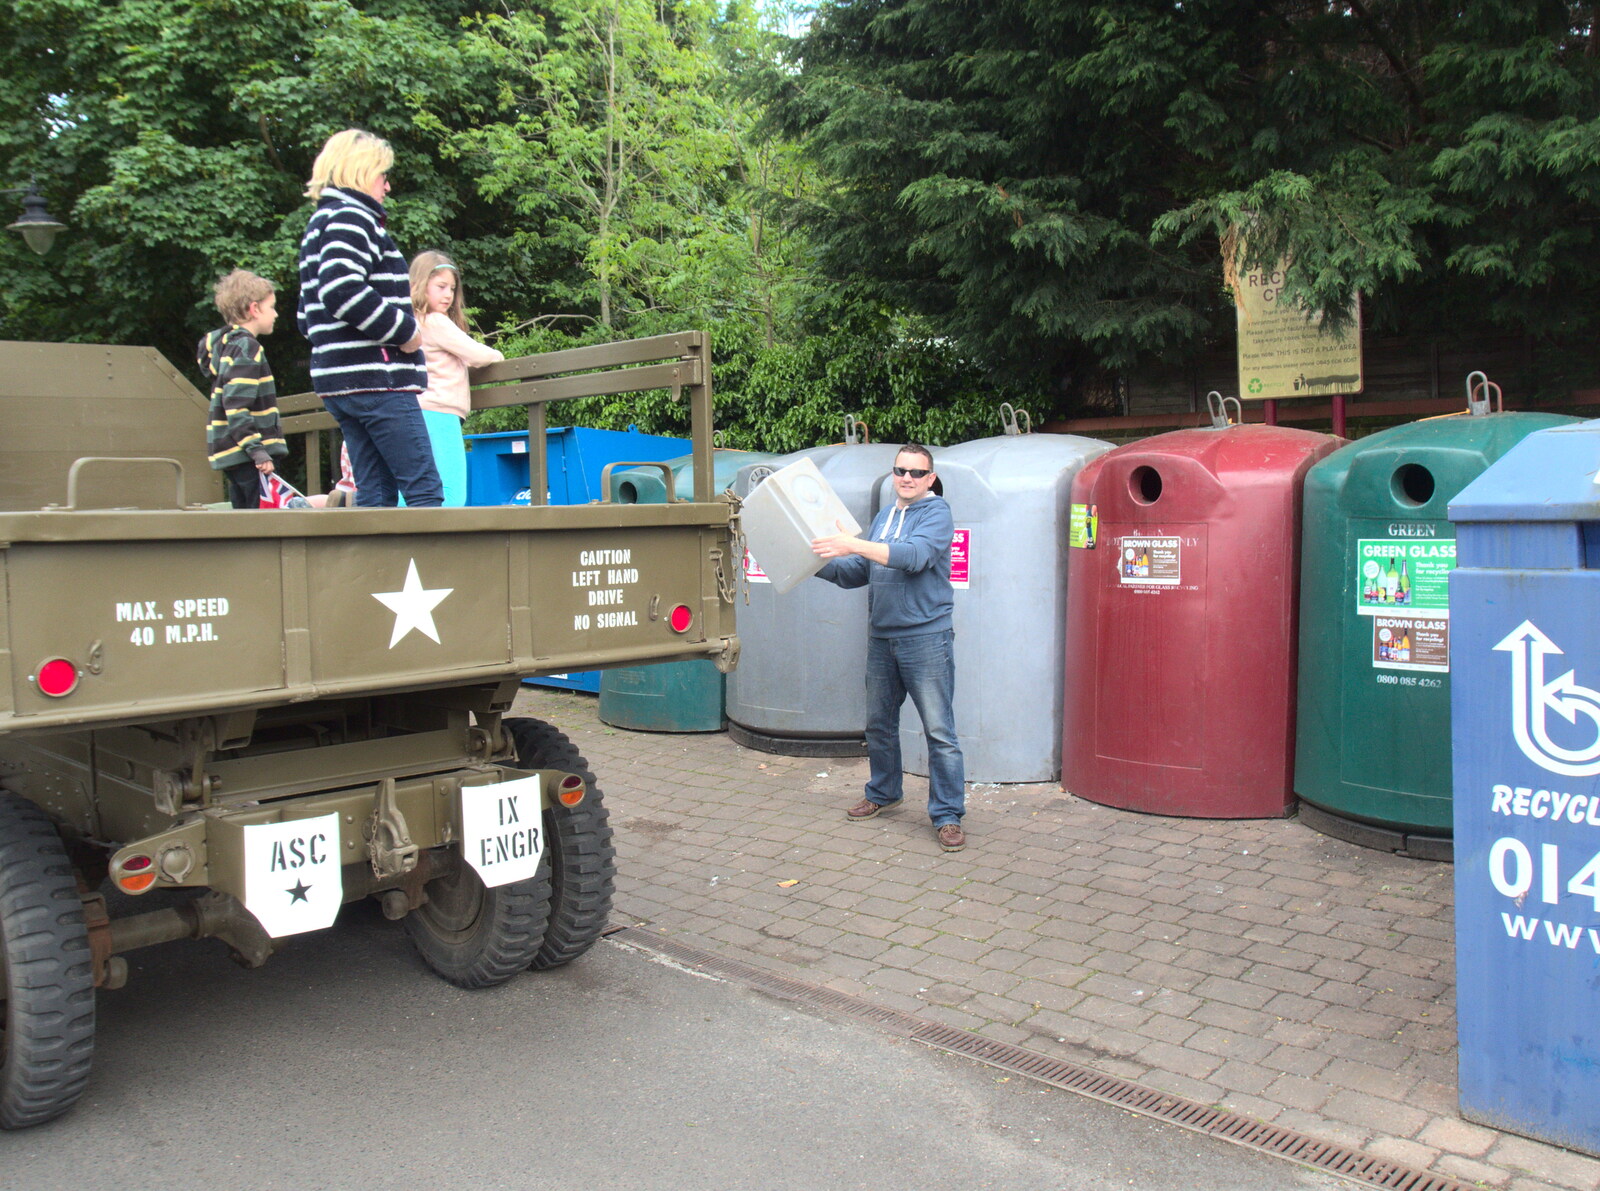 Clive visits the bottle bank from Clive and Suzanne's Party, Braisworth, Suffolk - 21st May 2017